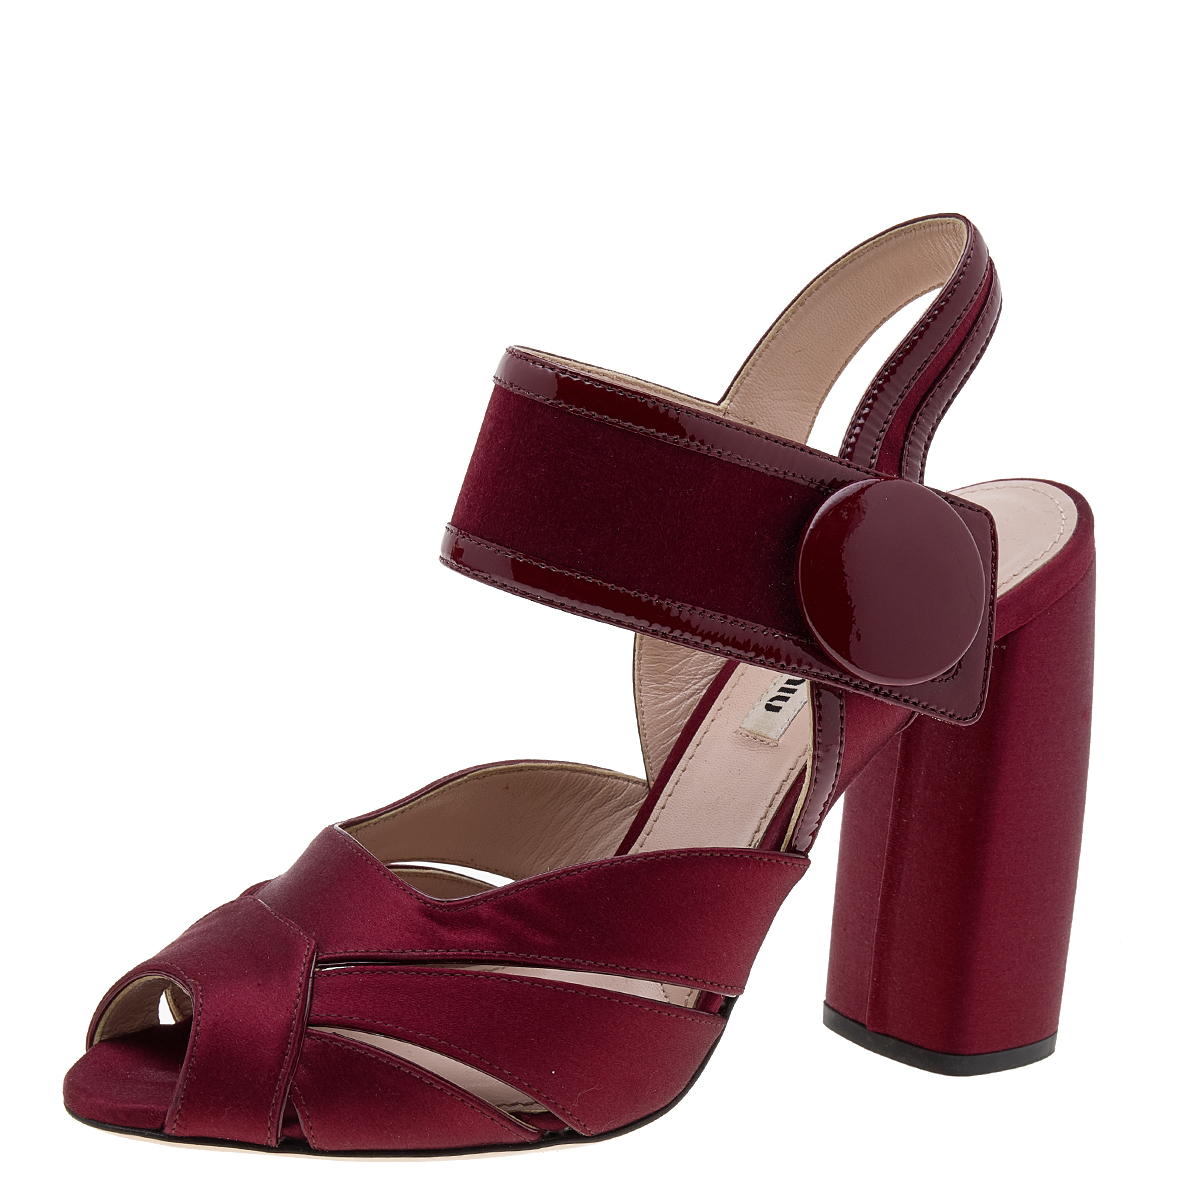 Miu Miu Burgundy Satin And Patent Leather Ankle Strap Sandals Size 36